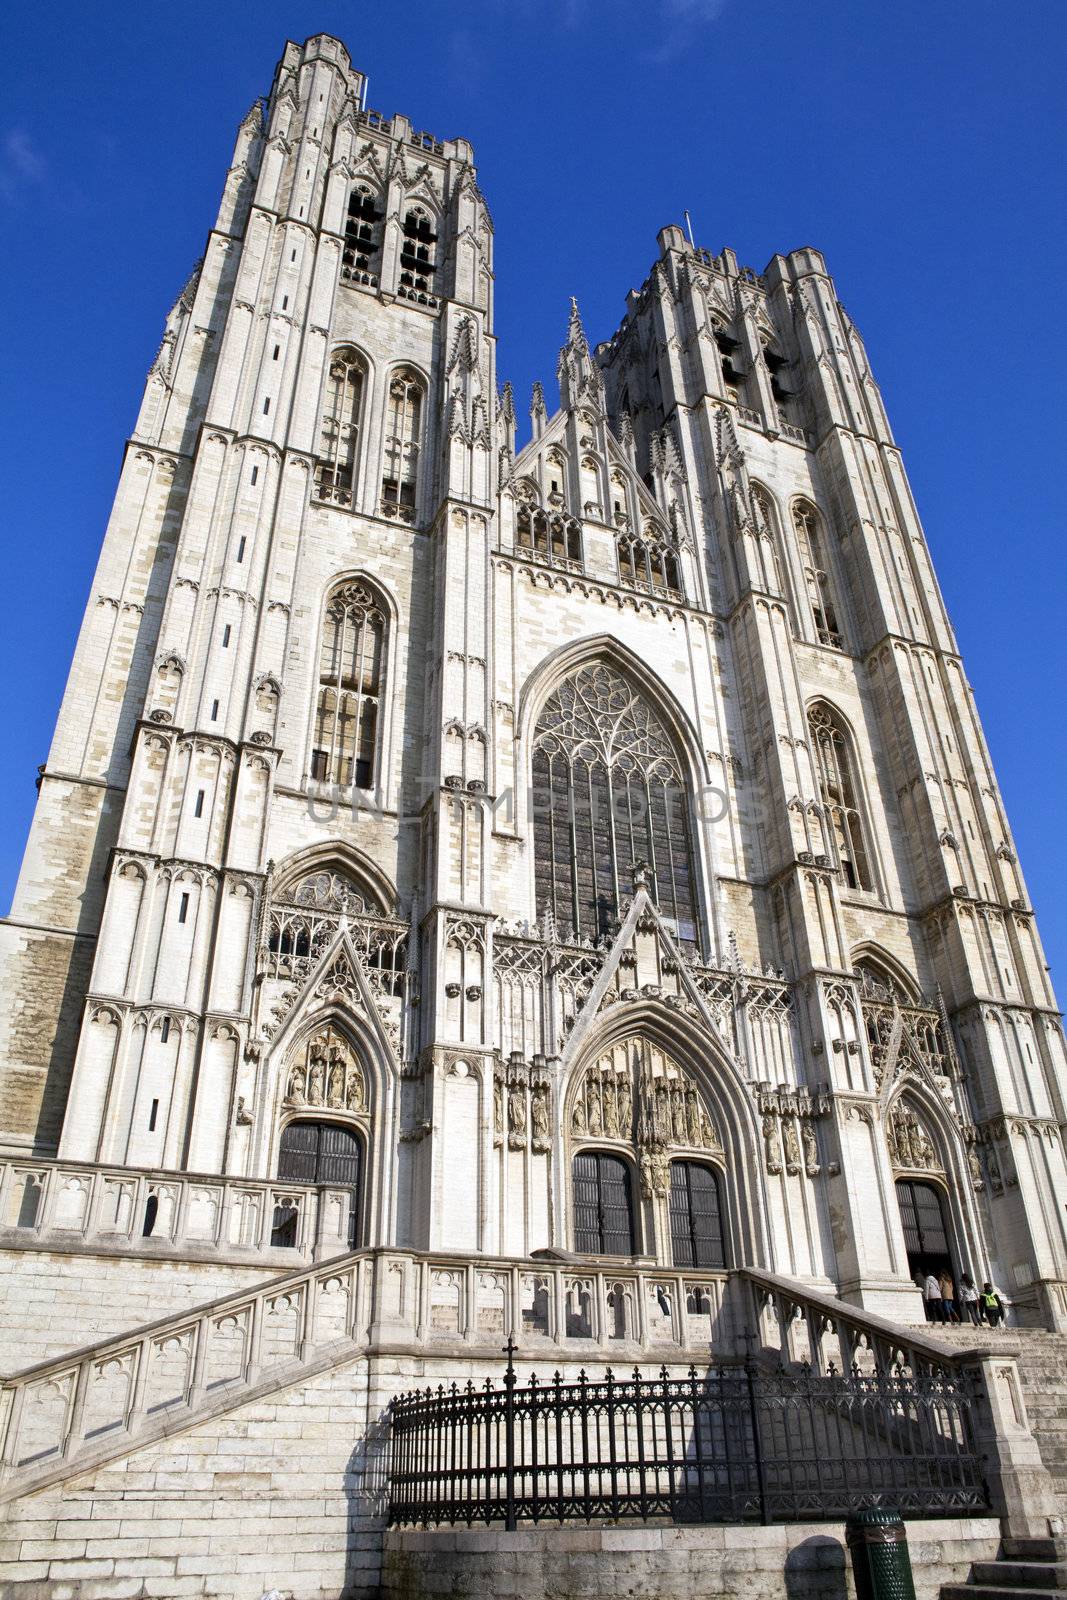 The impressive St. Michael and St. Gudula Cathedral in Brussels, Belgium.